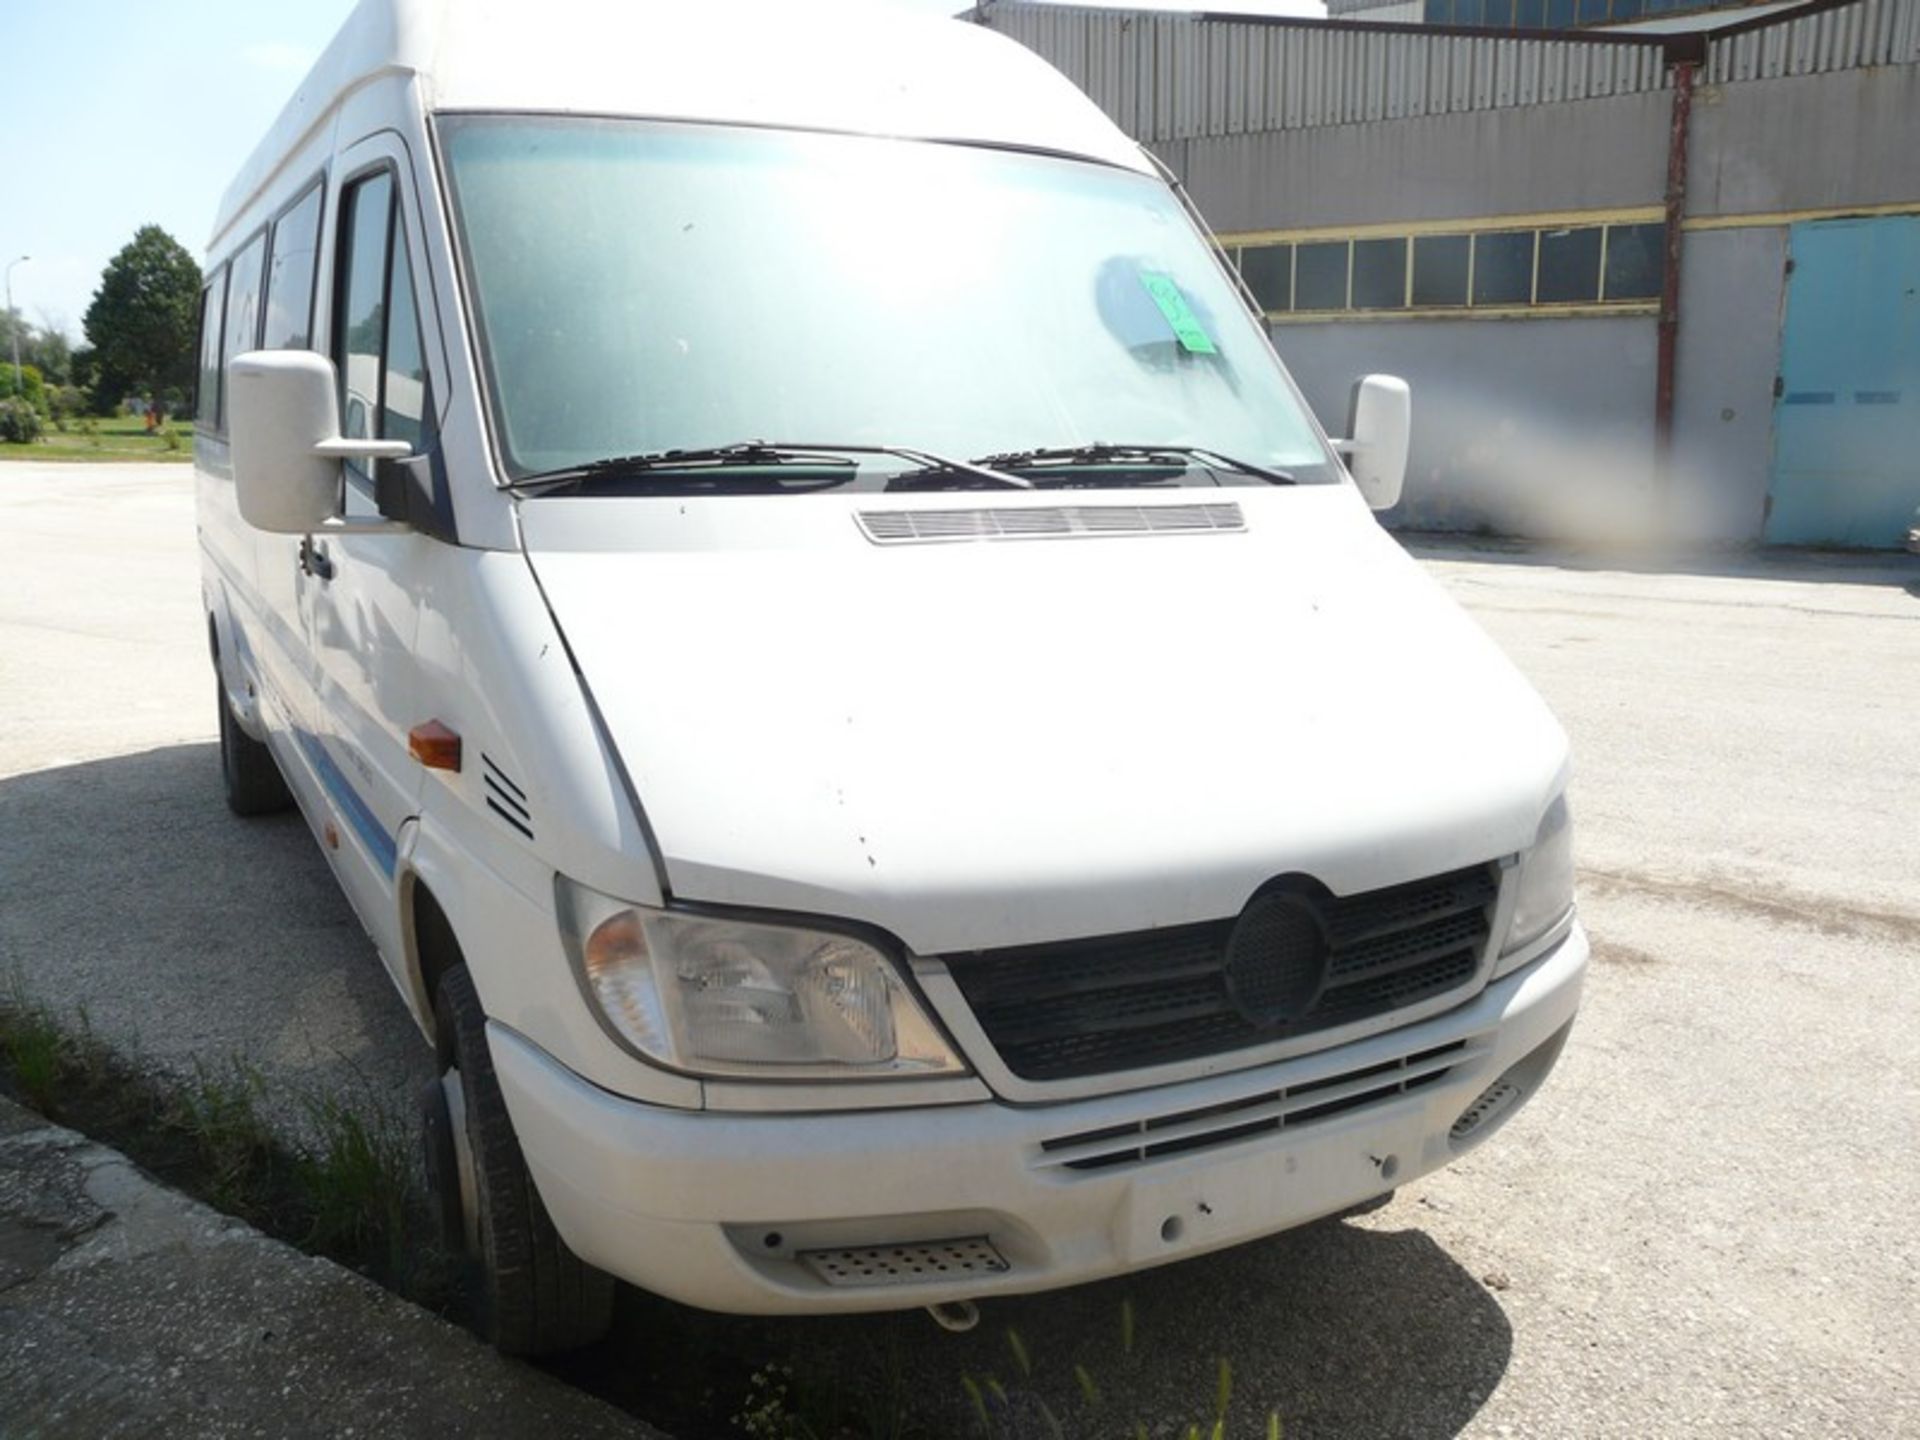 MERCENDES SPRINTER BUSS 16 SEATS ,5 GEAR , WITH AUTOMATIC DOOR , KM : 216710 , REG NZM 4876 ,Y.O.M - Image 4 of 13